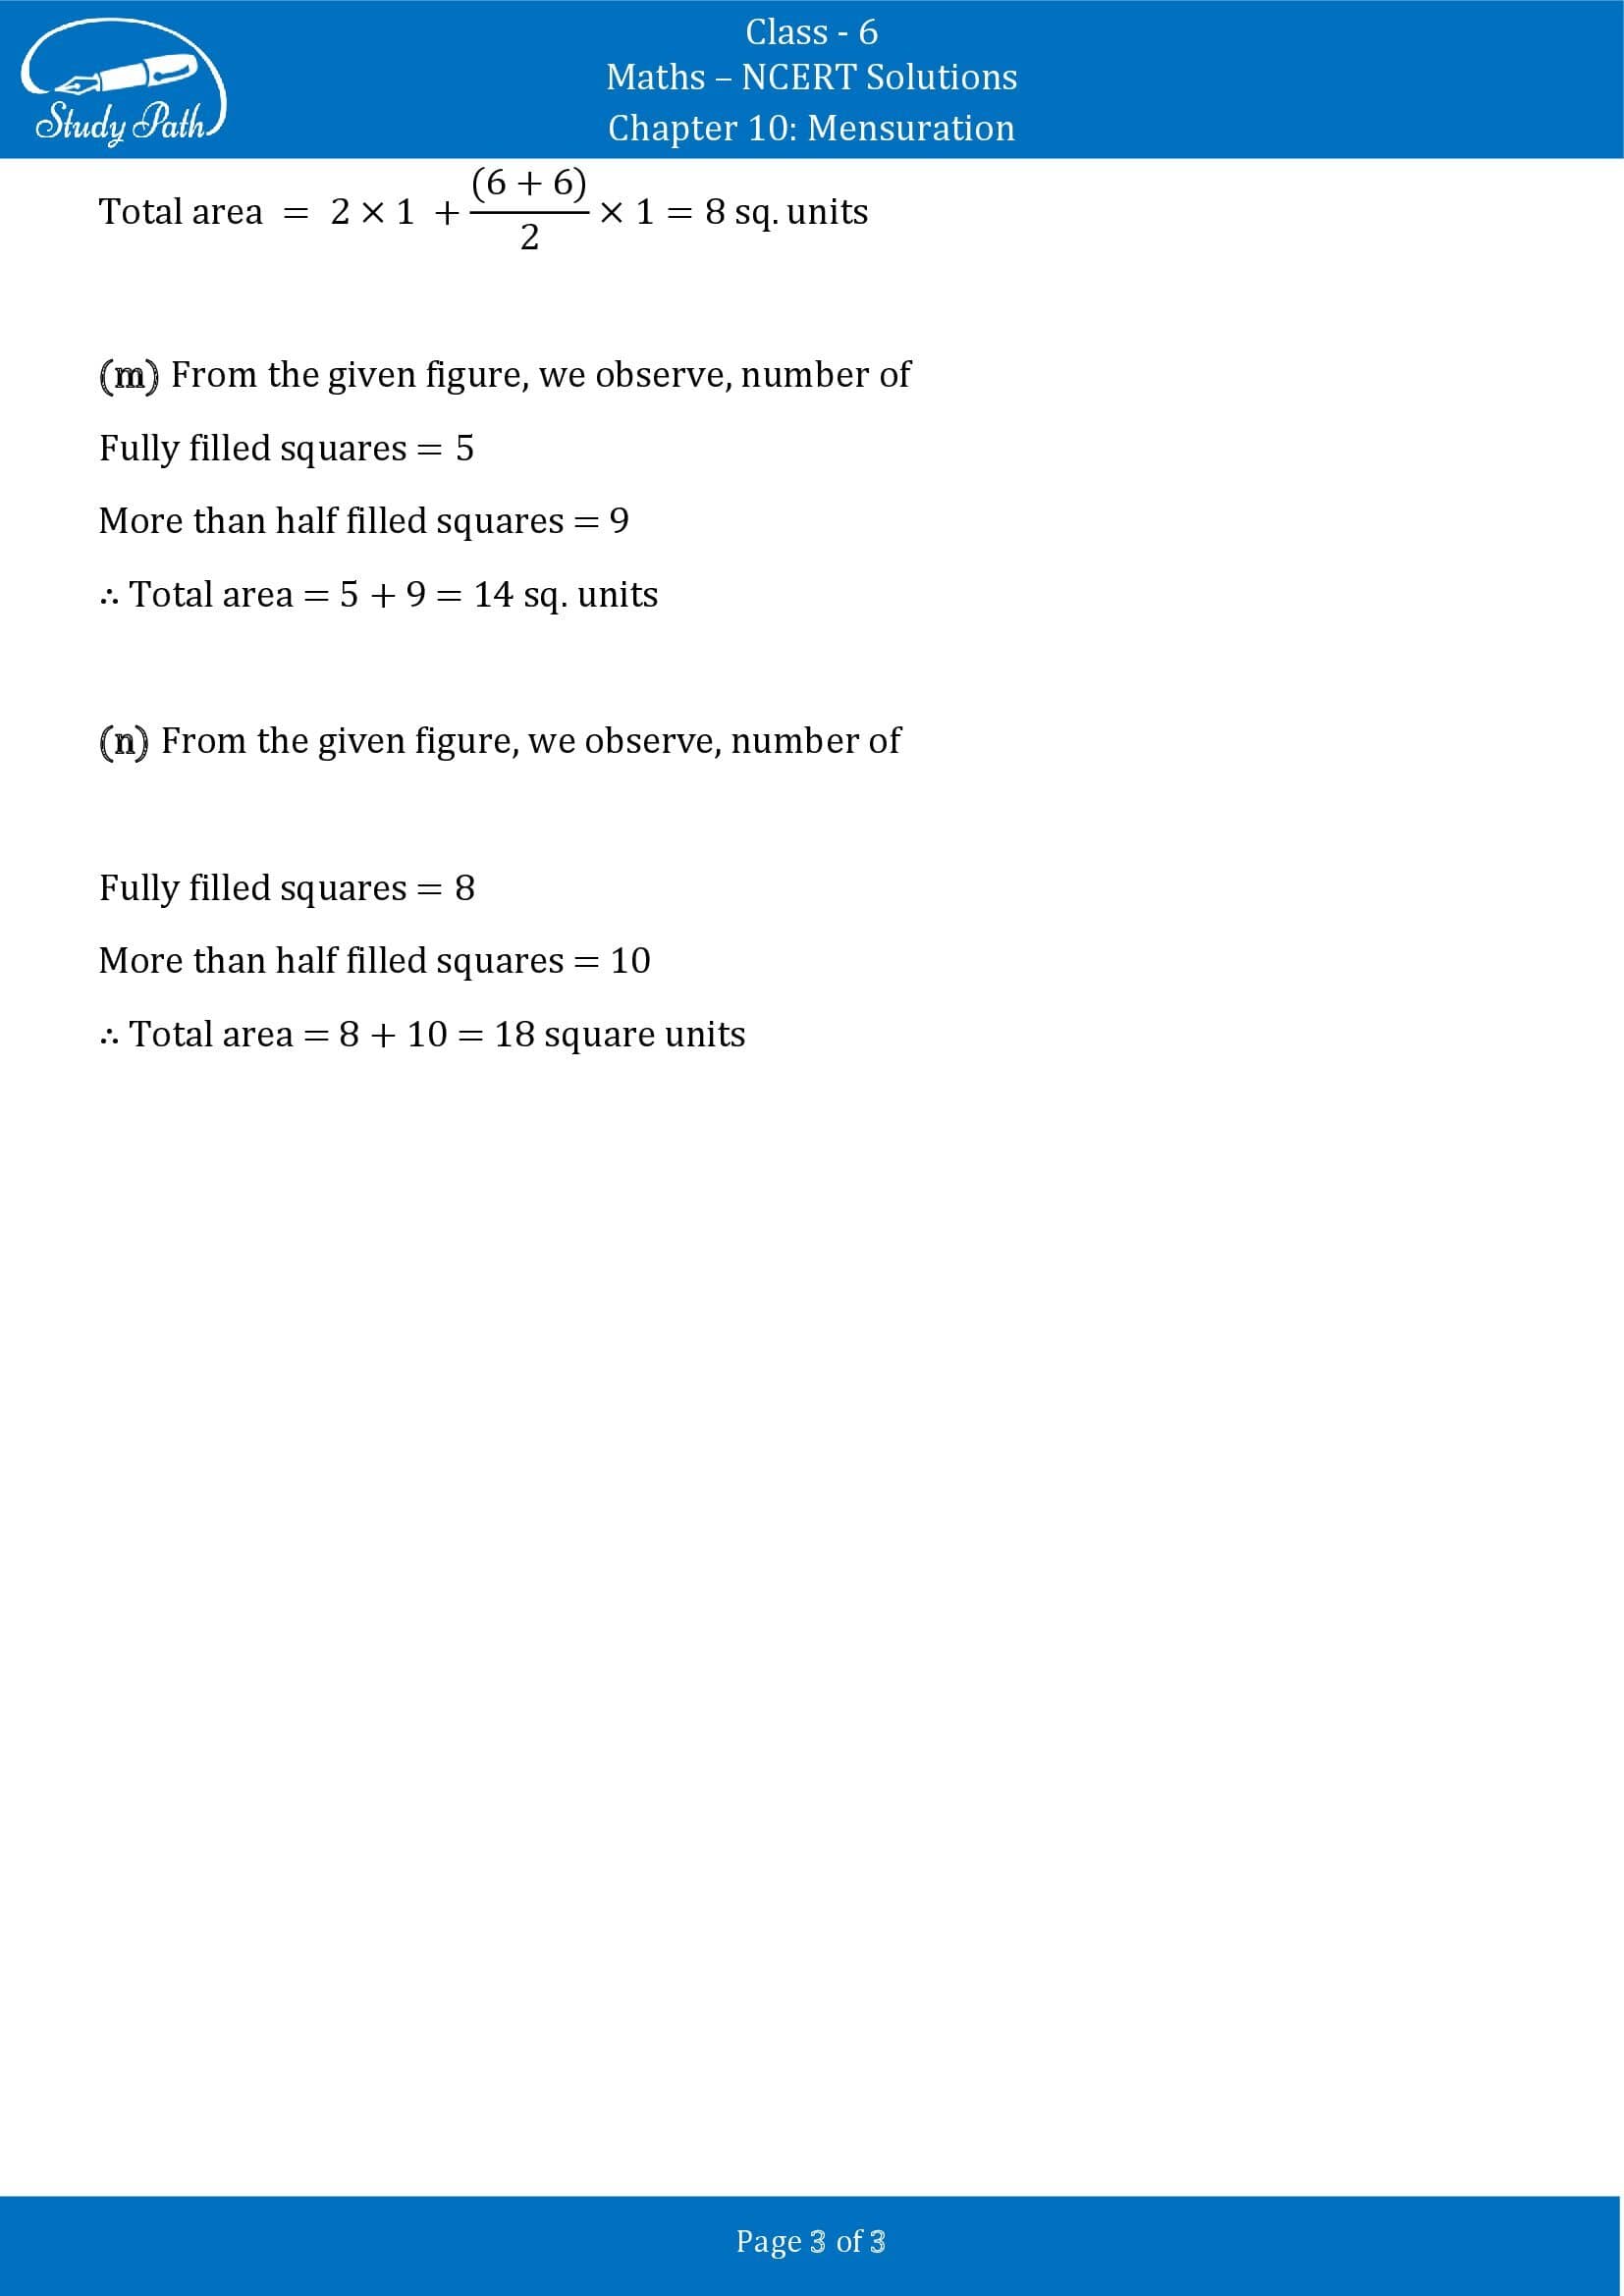 NCERT Solutions for Class 6 Maths Chapter 10 Mensuration Exercise 10.2 00003